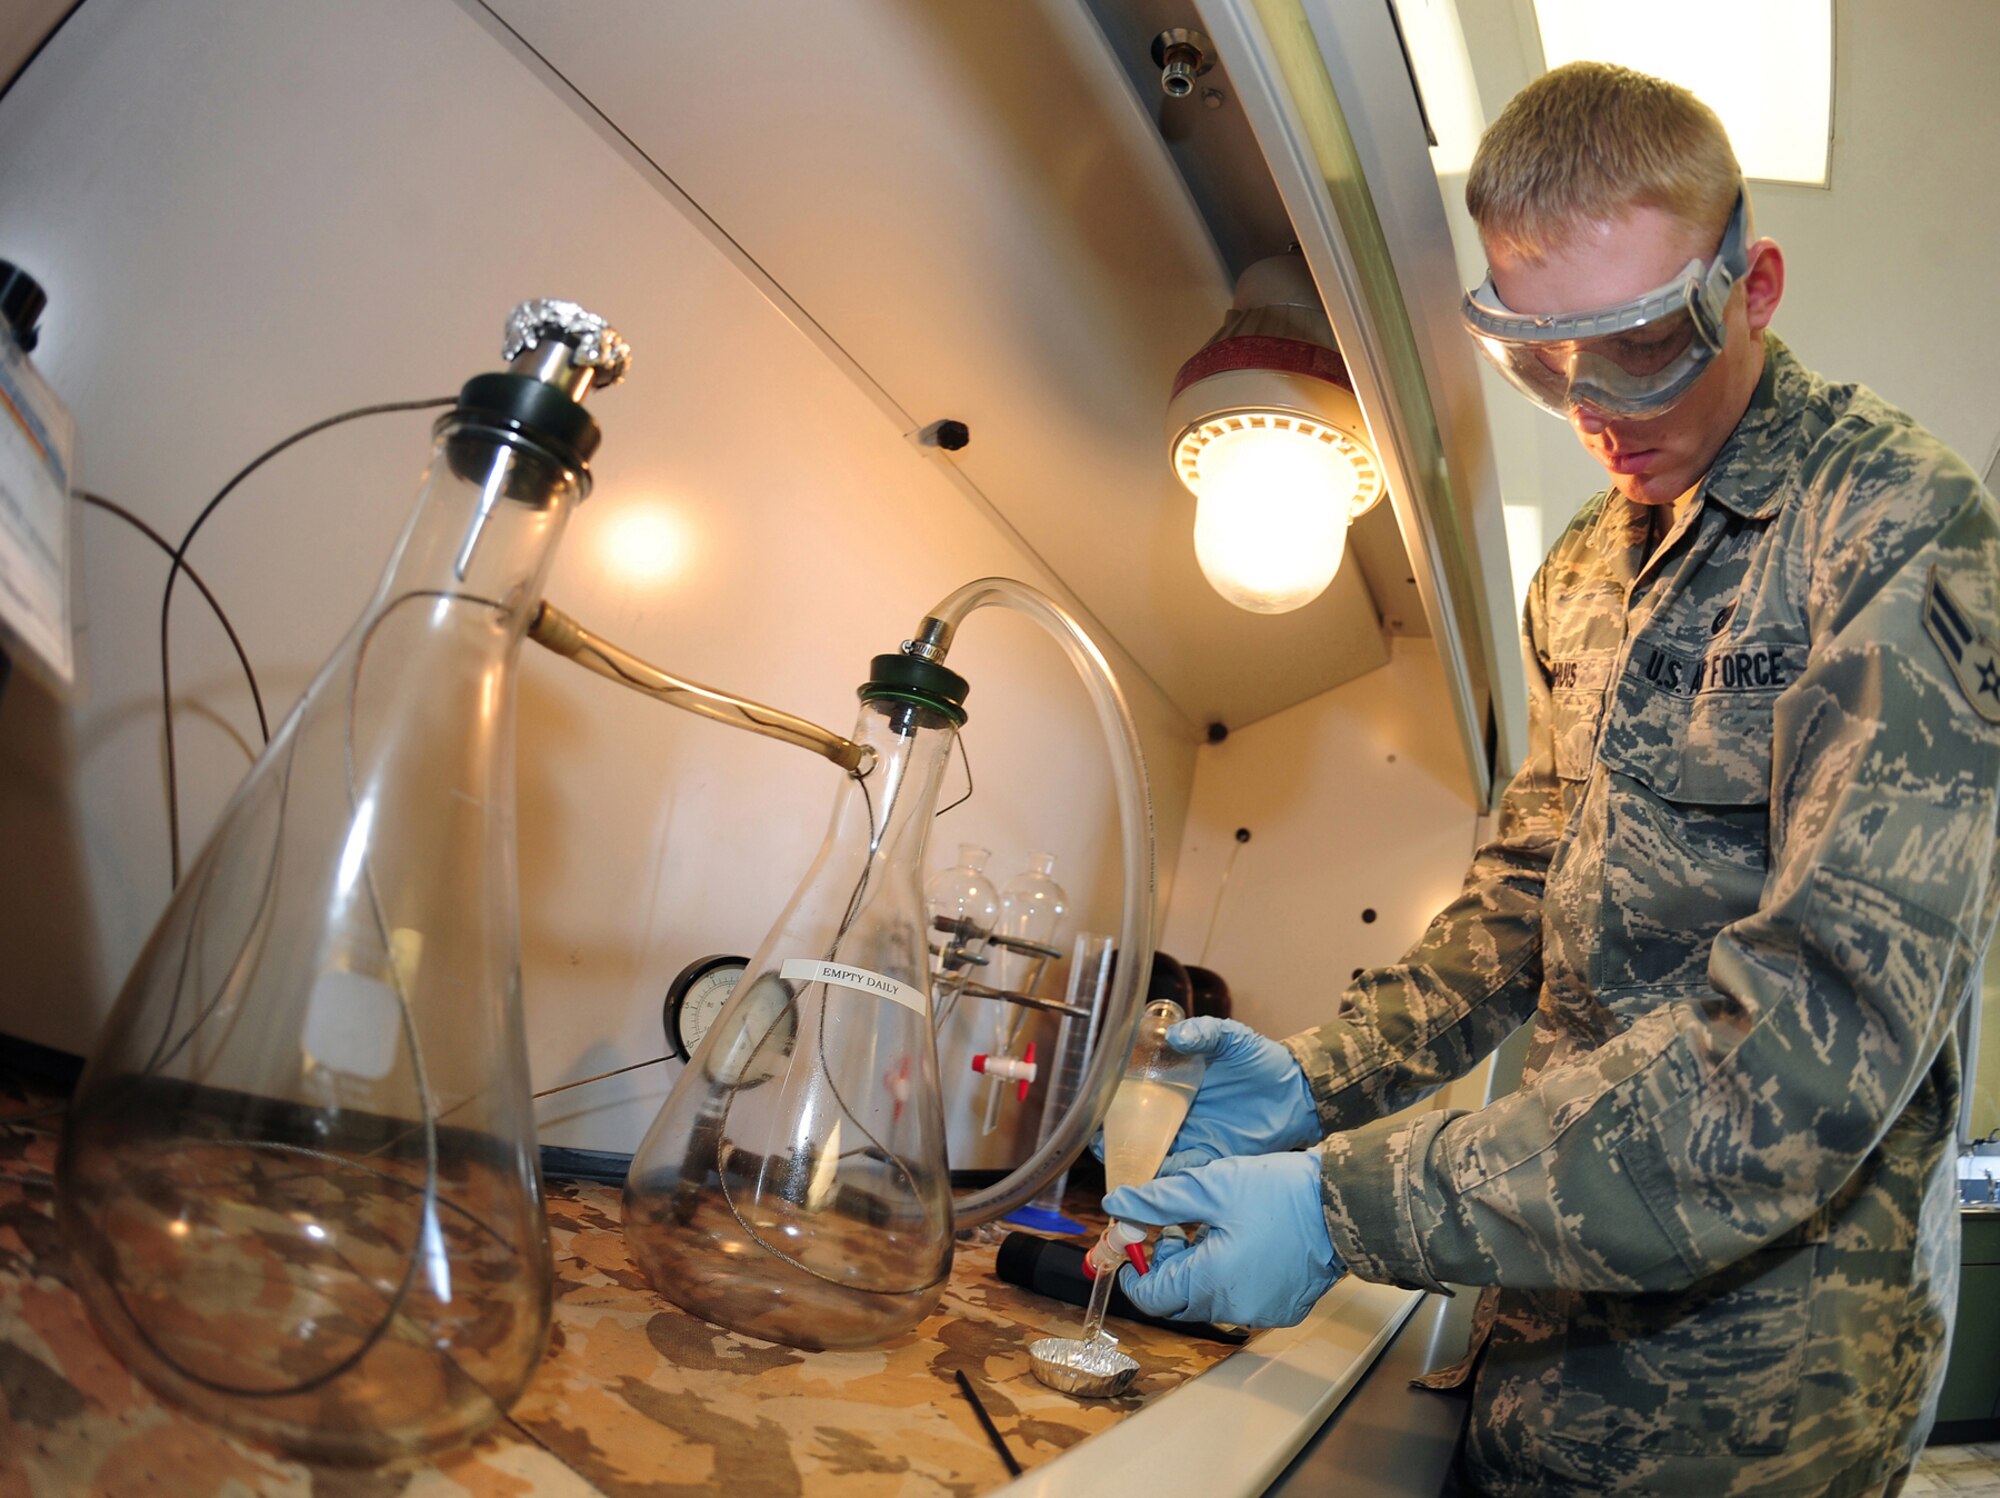 OFFUTT AIR FORCE BASE, Neb. - Airman 1st Class Edward Damhuis, a fuels labratory technician, performs tests in the Fuels Management Flight's fuels information center laboratory here March 1. The laboratory tests fuel for various things including the level of Fuel System Ice Inhibitor additive. U.S. Air Force photo by Josh Plueger
